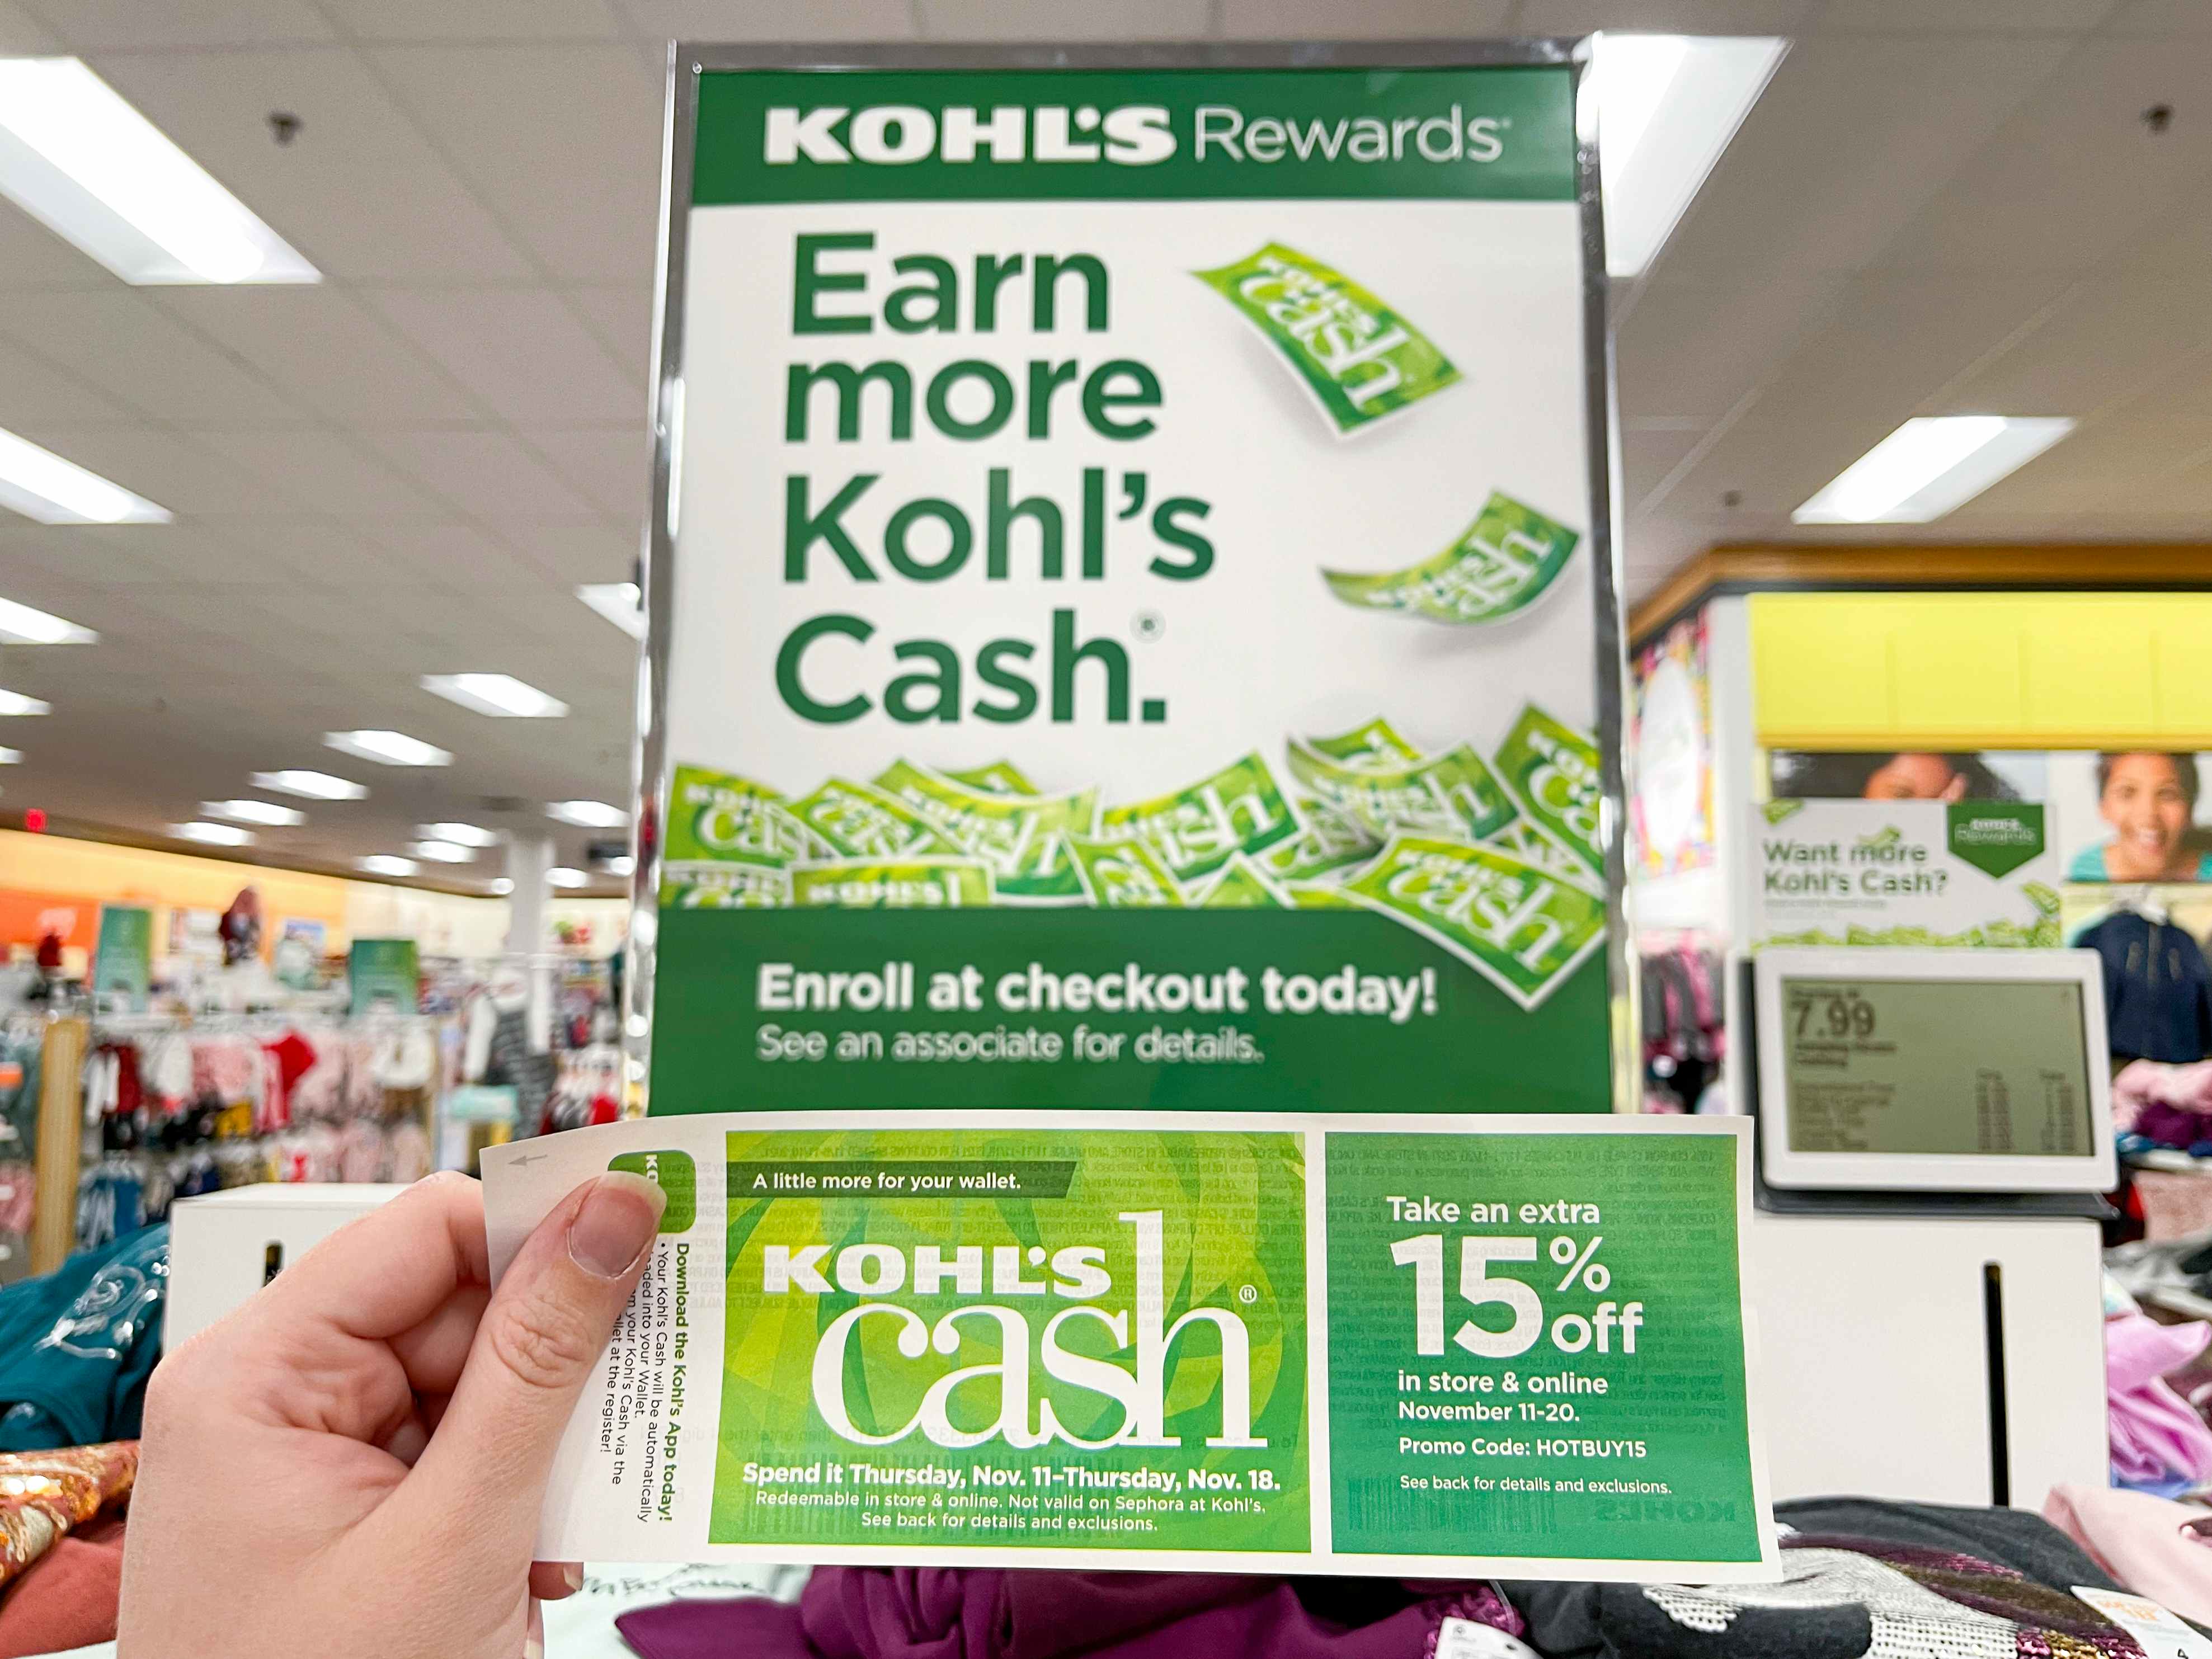 A person holding Kohl's cash near a Kohl's cash sign